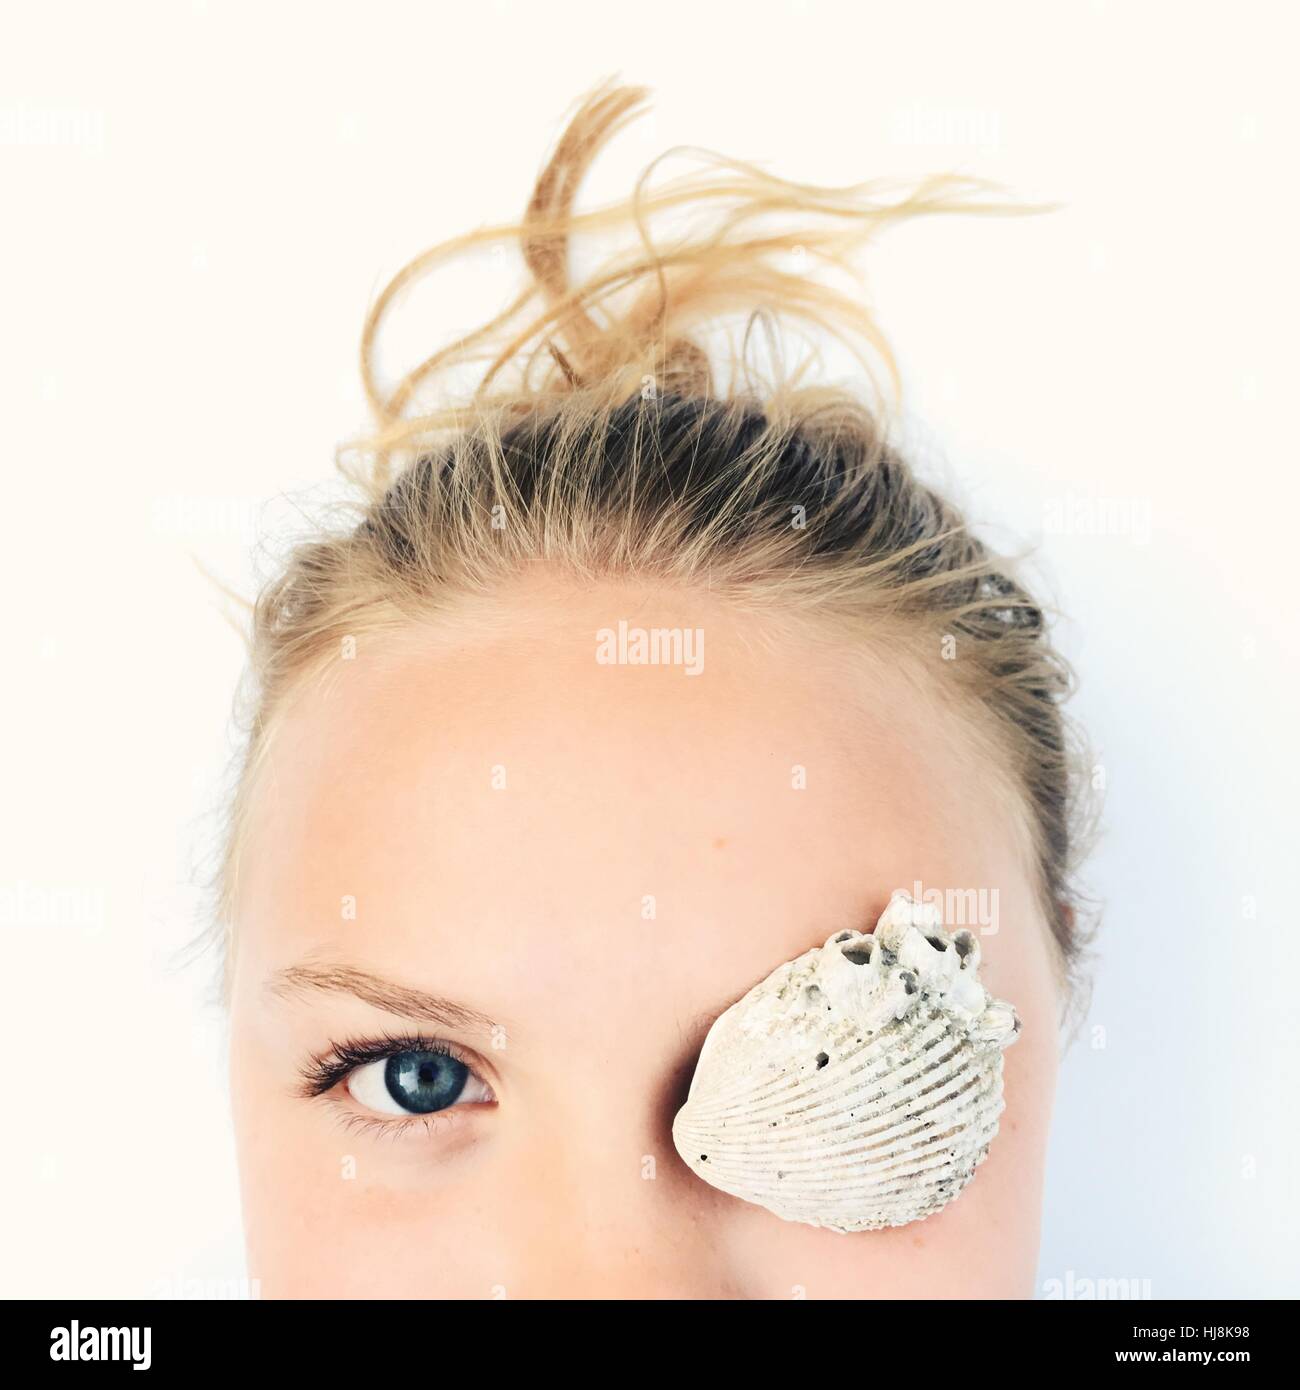 Portrait of a girl with a shell on her eye Stock Photo